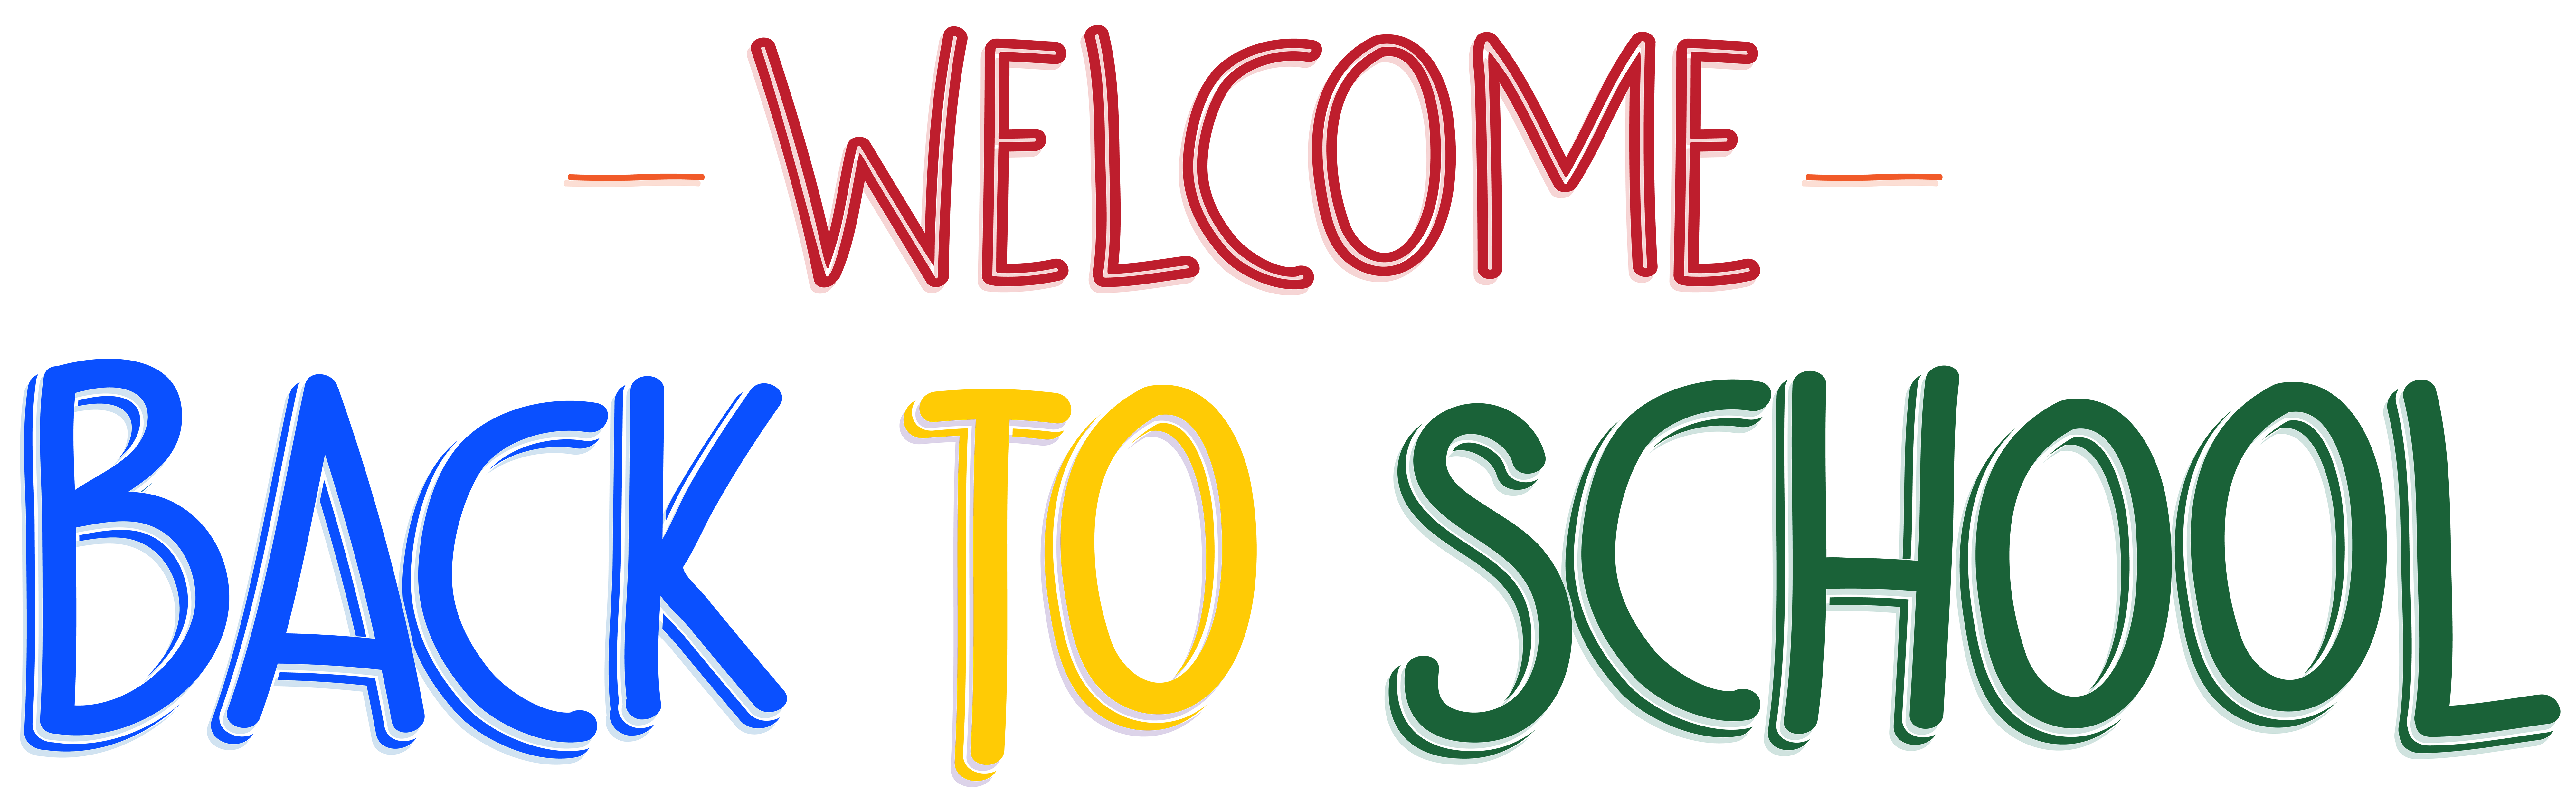 Welcome Back To School Clipart Many Interesting Cliparts